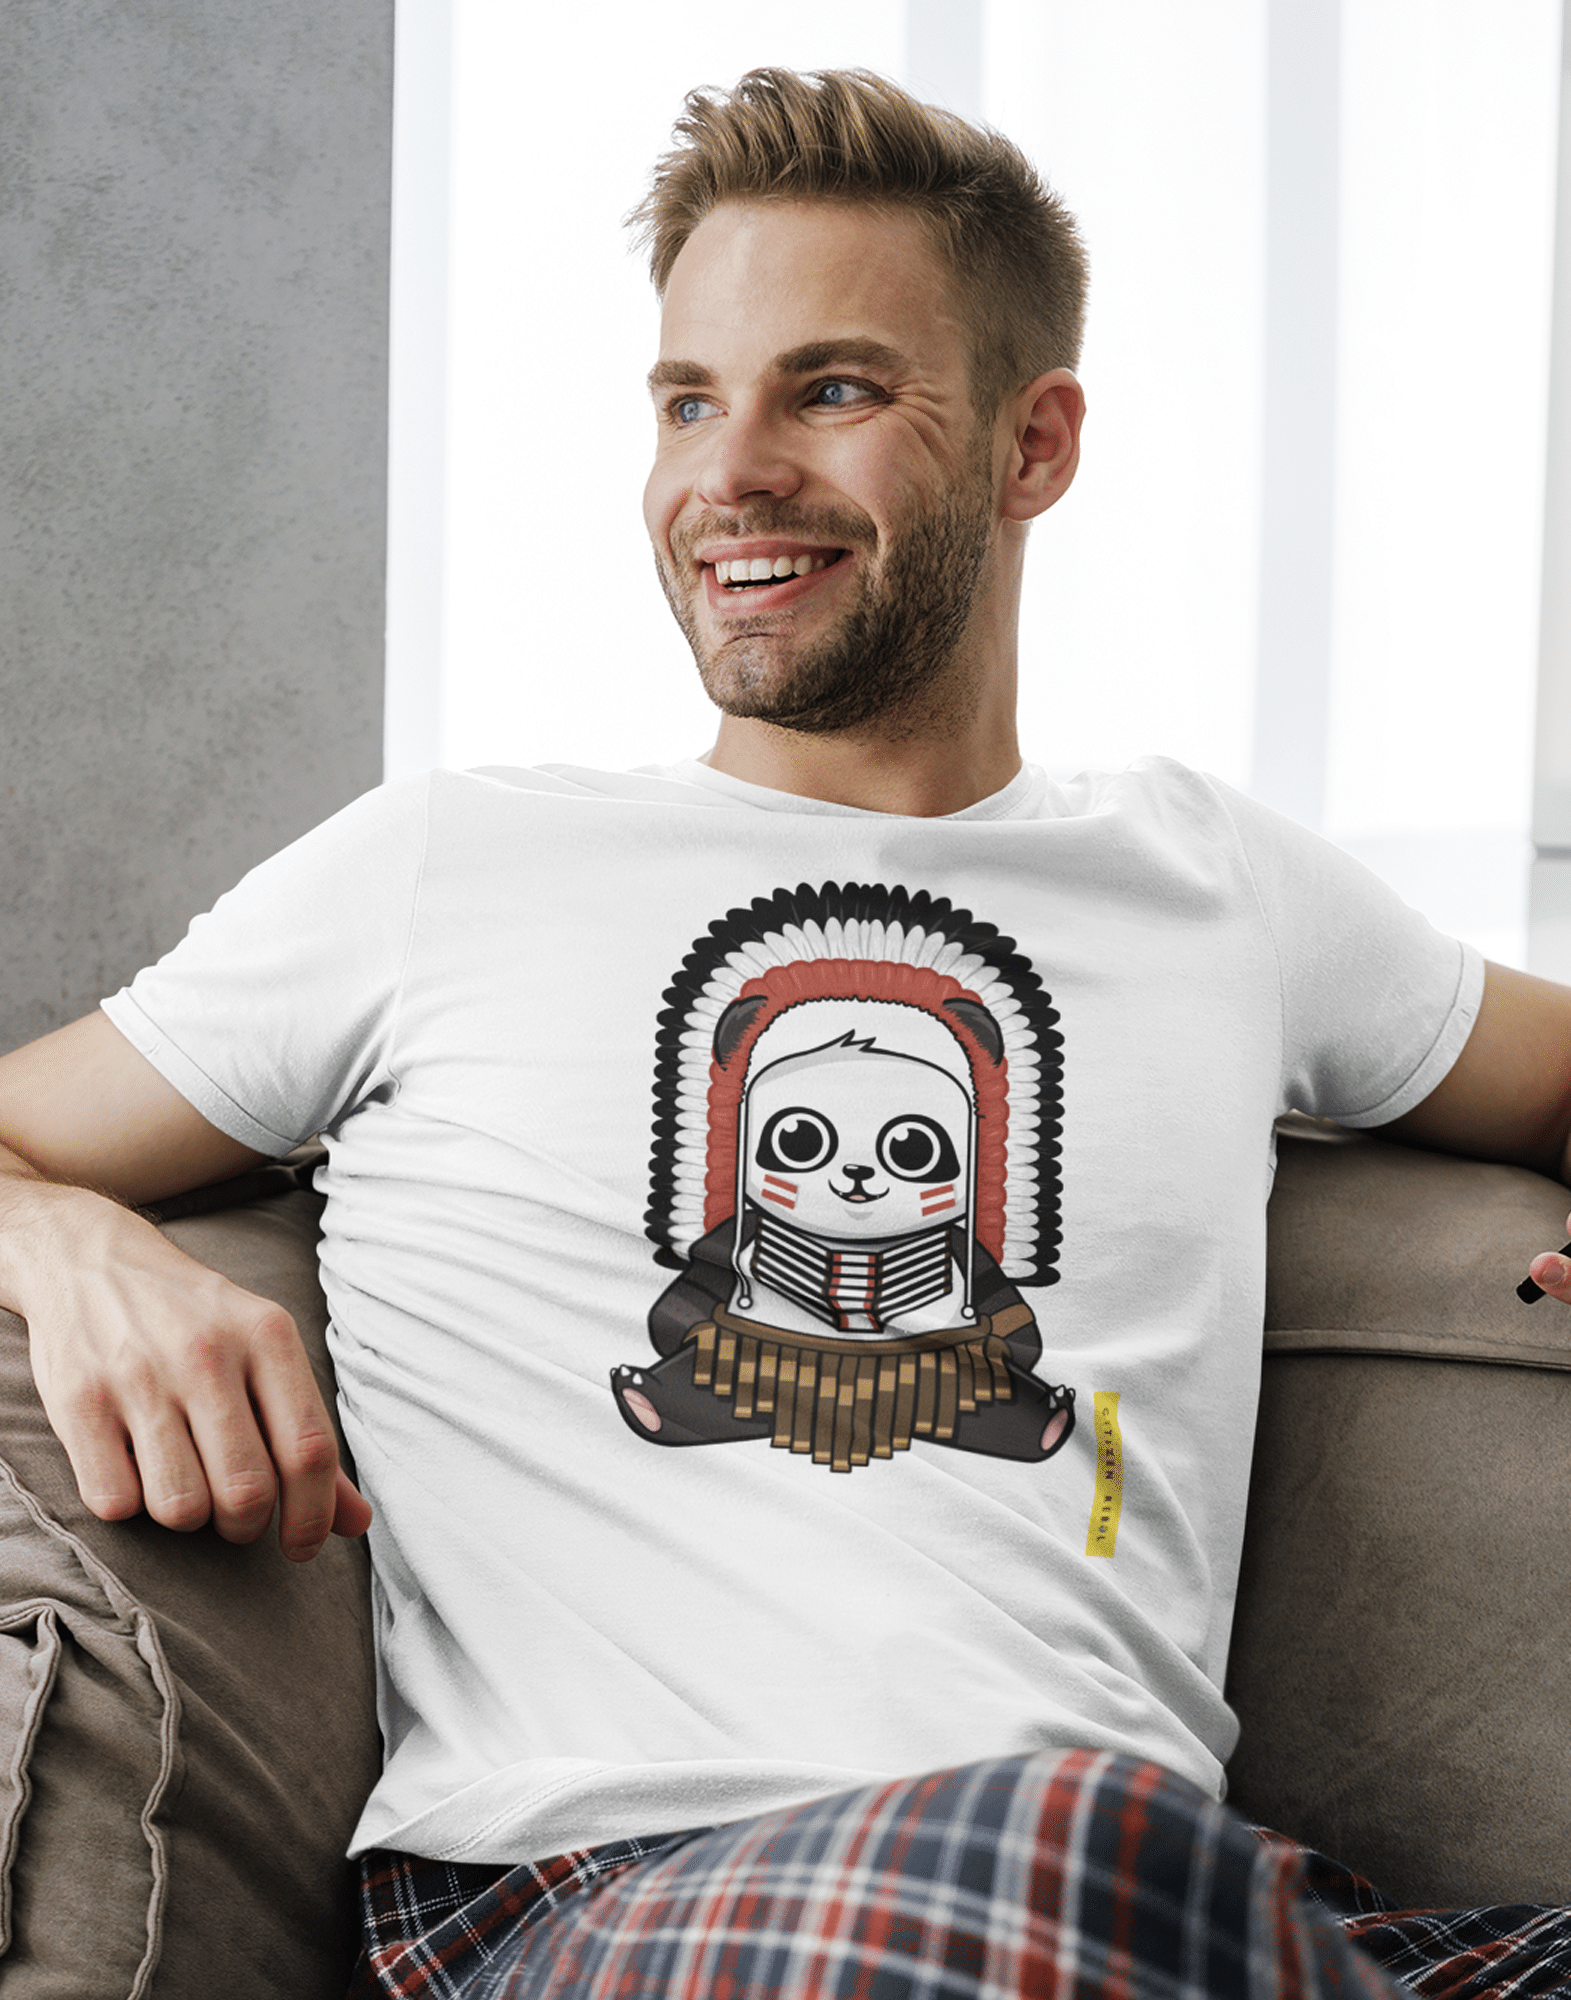 Men's Printed T-Shirt for independence day – Smiling Panda